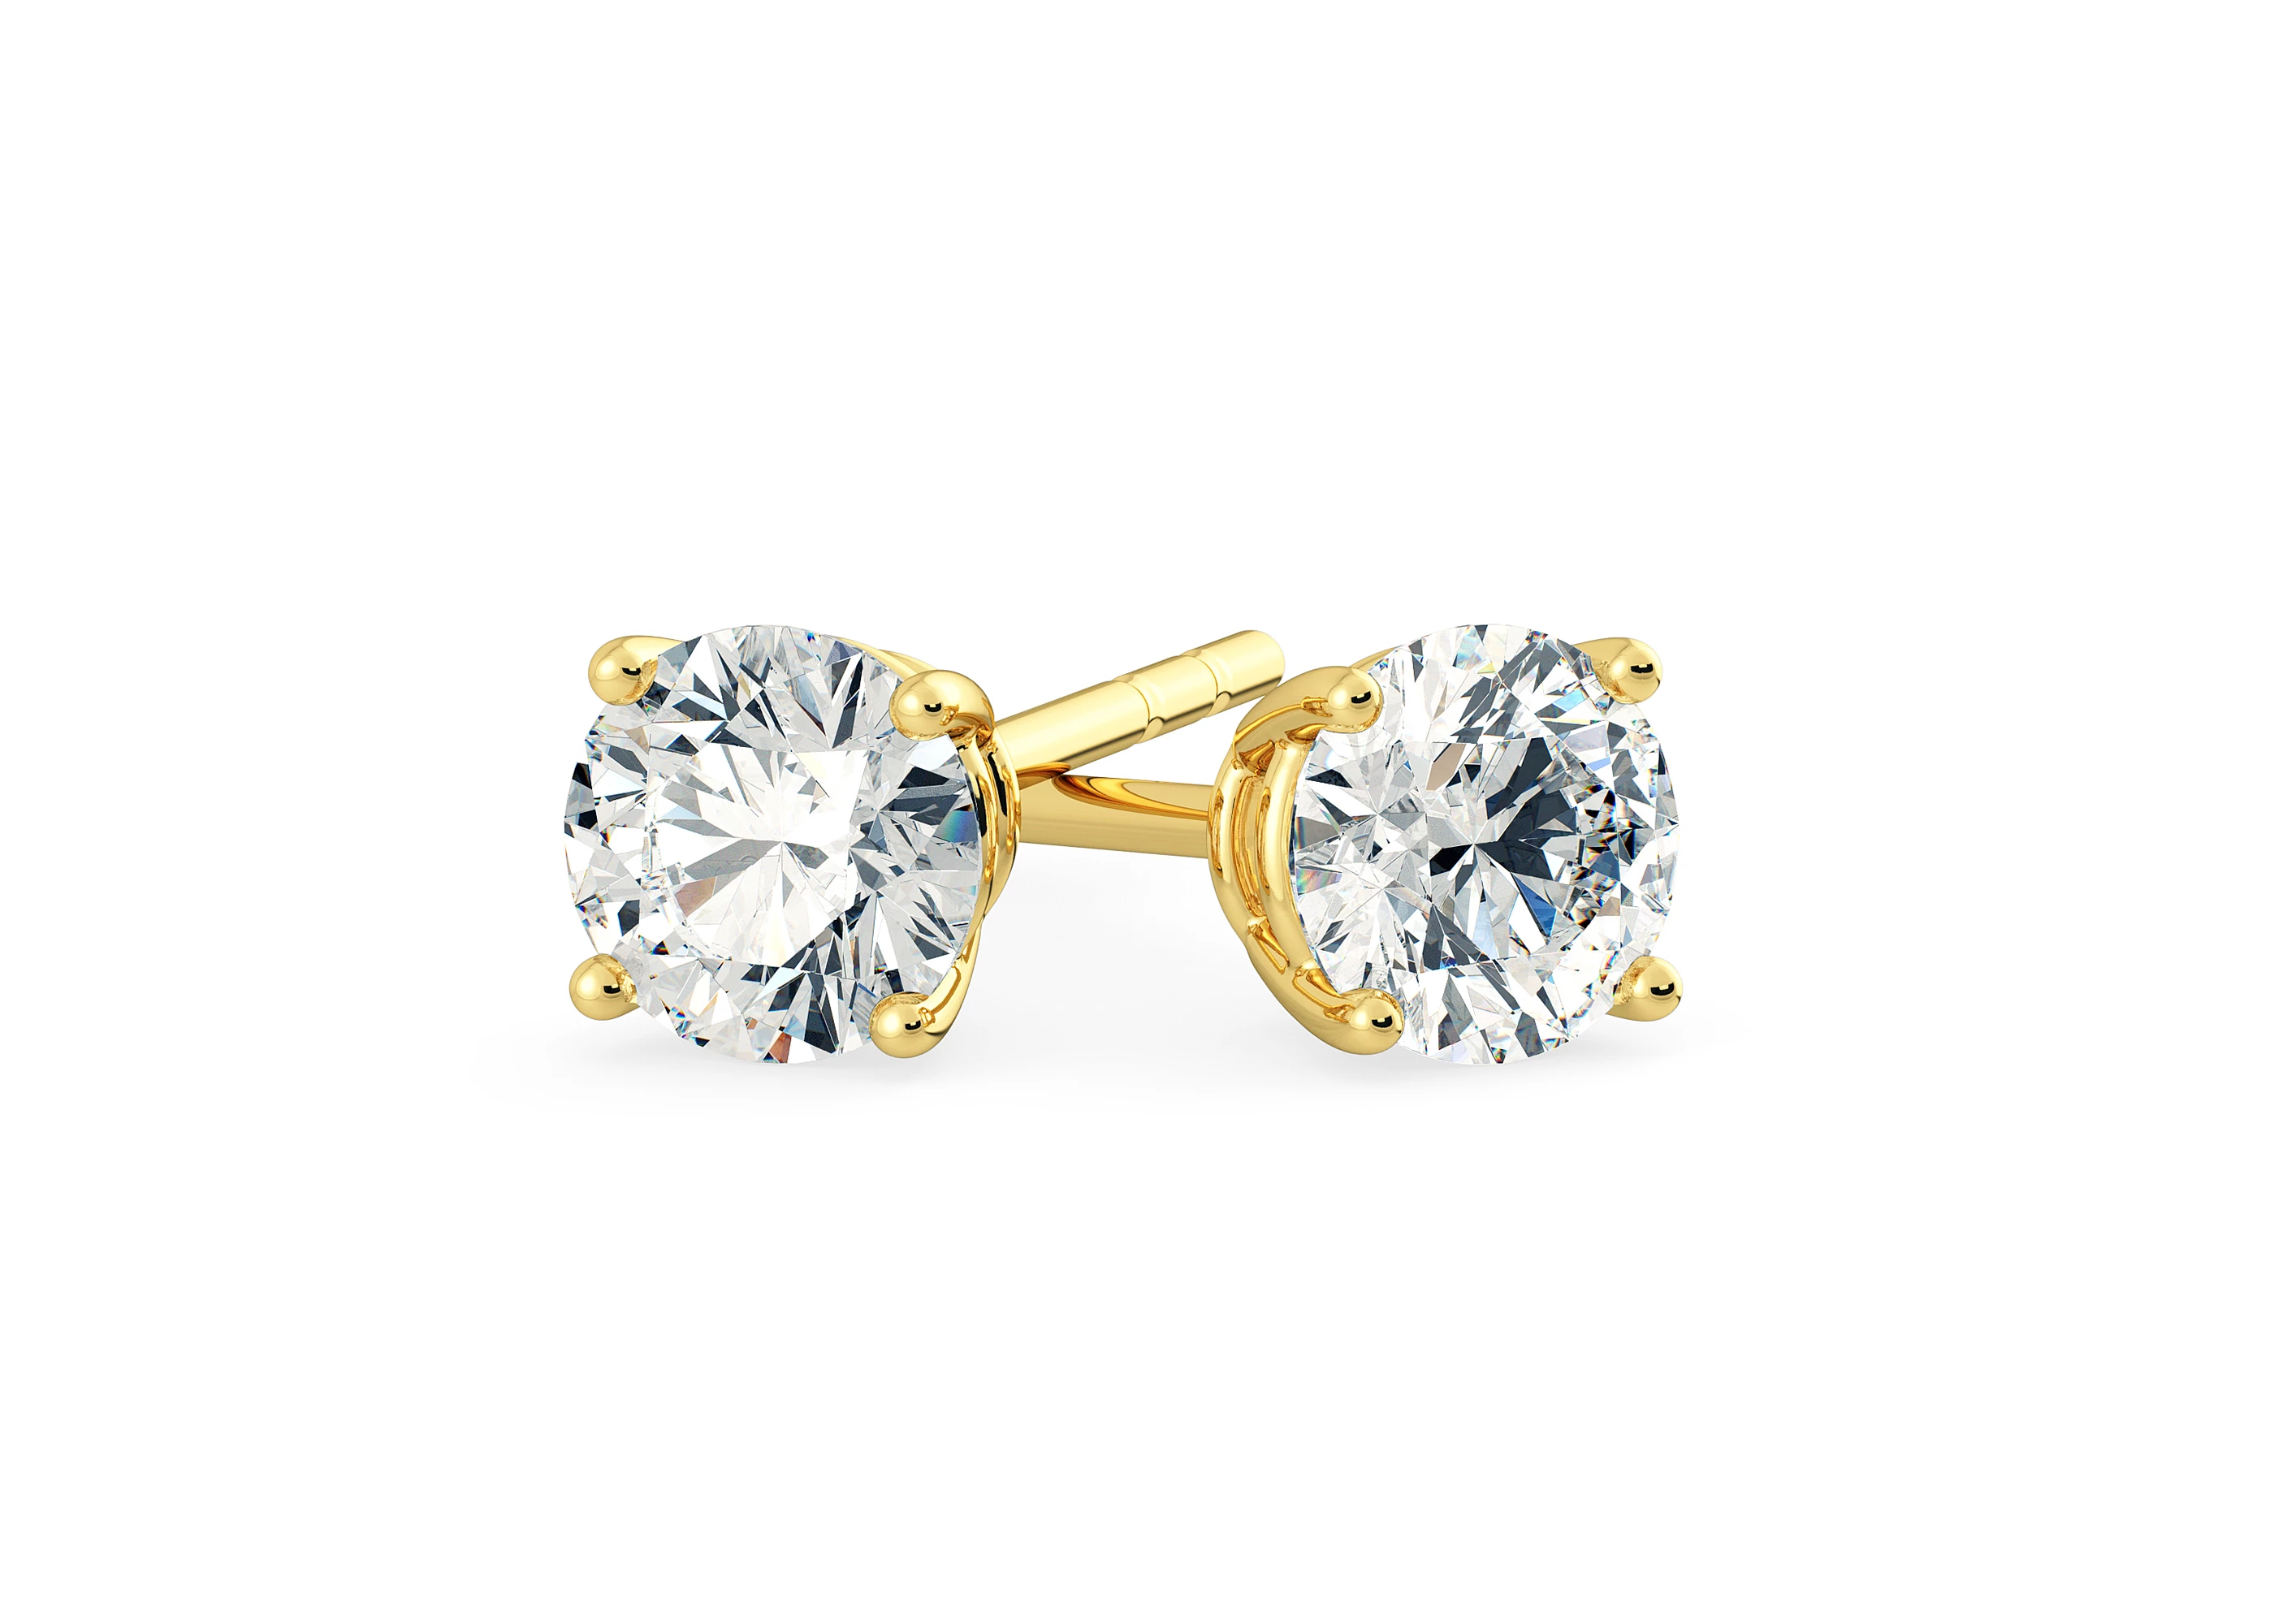 Ettore Round Brilliant Diamond Stud Earrings in 18K Yellow Gold with Alpha Backs